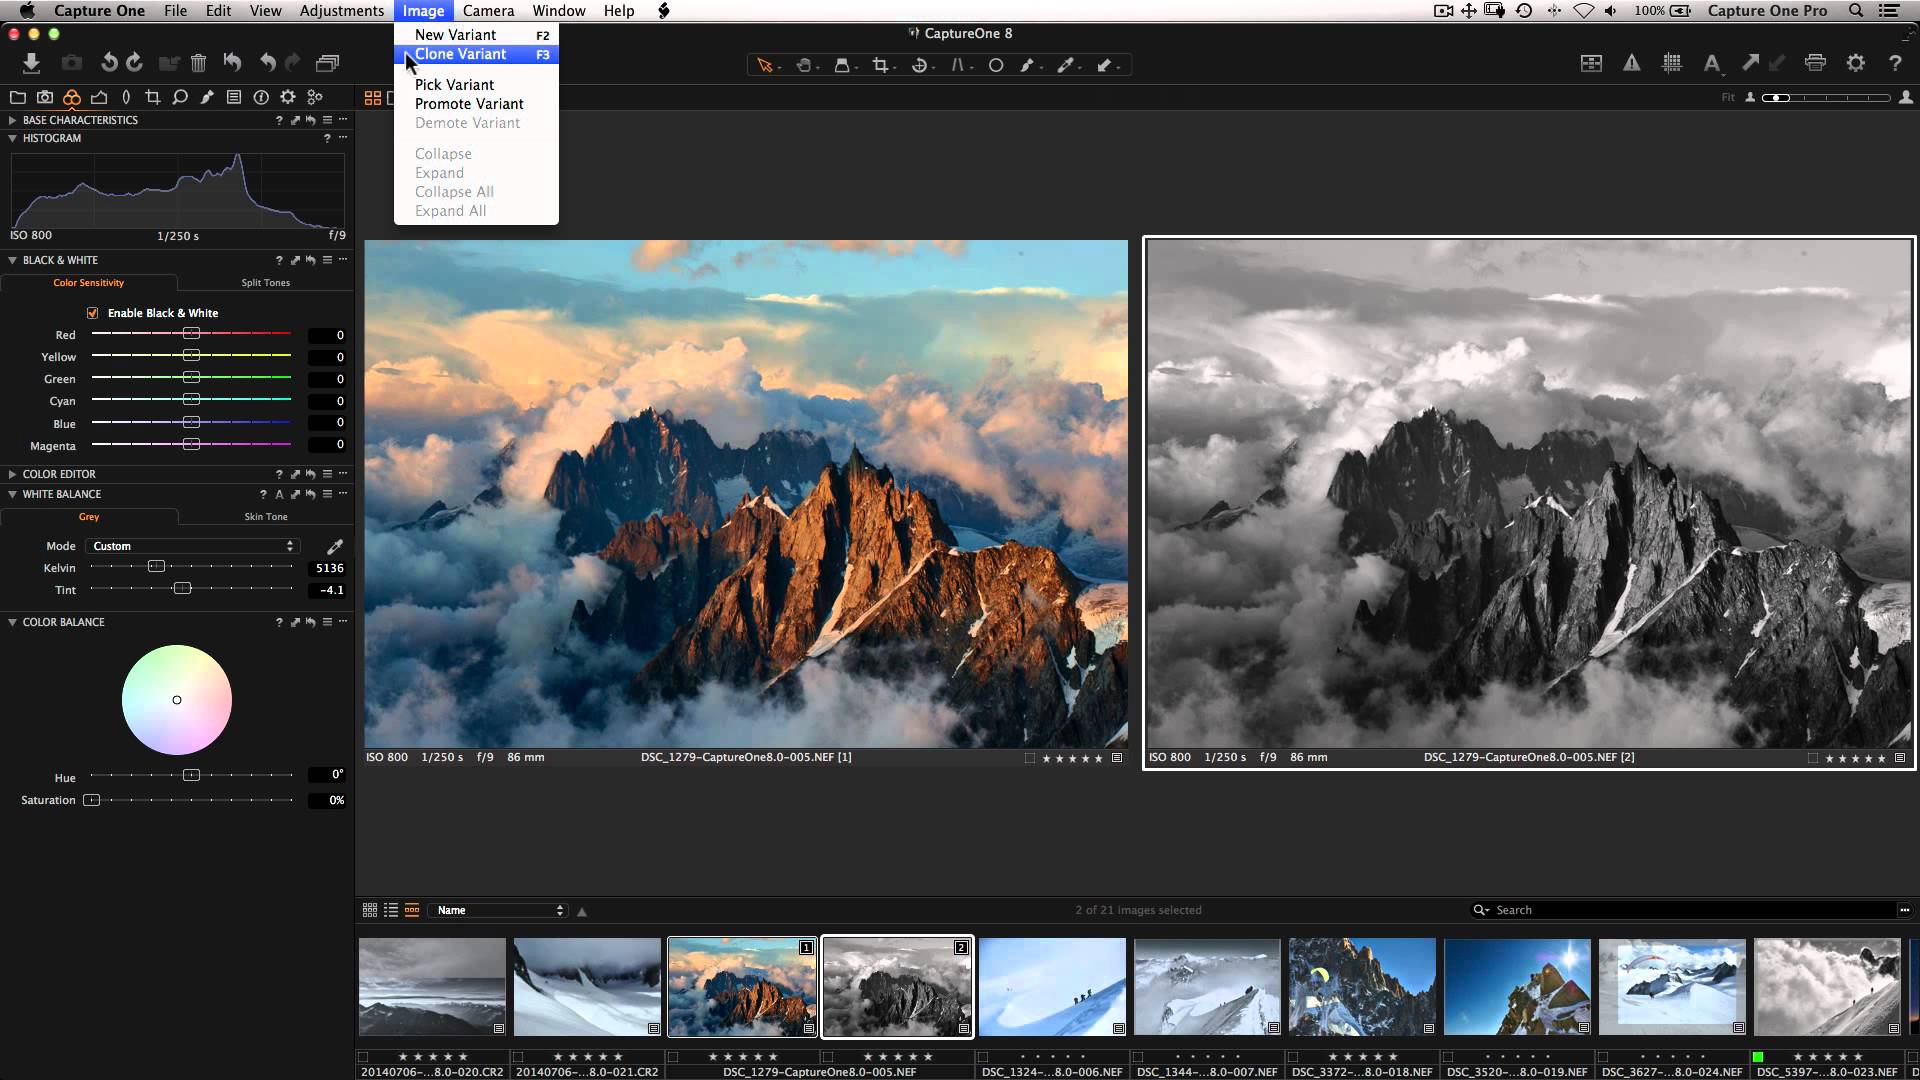 Capture One 23 Pro 16.3.0.1682 for windows instal